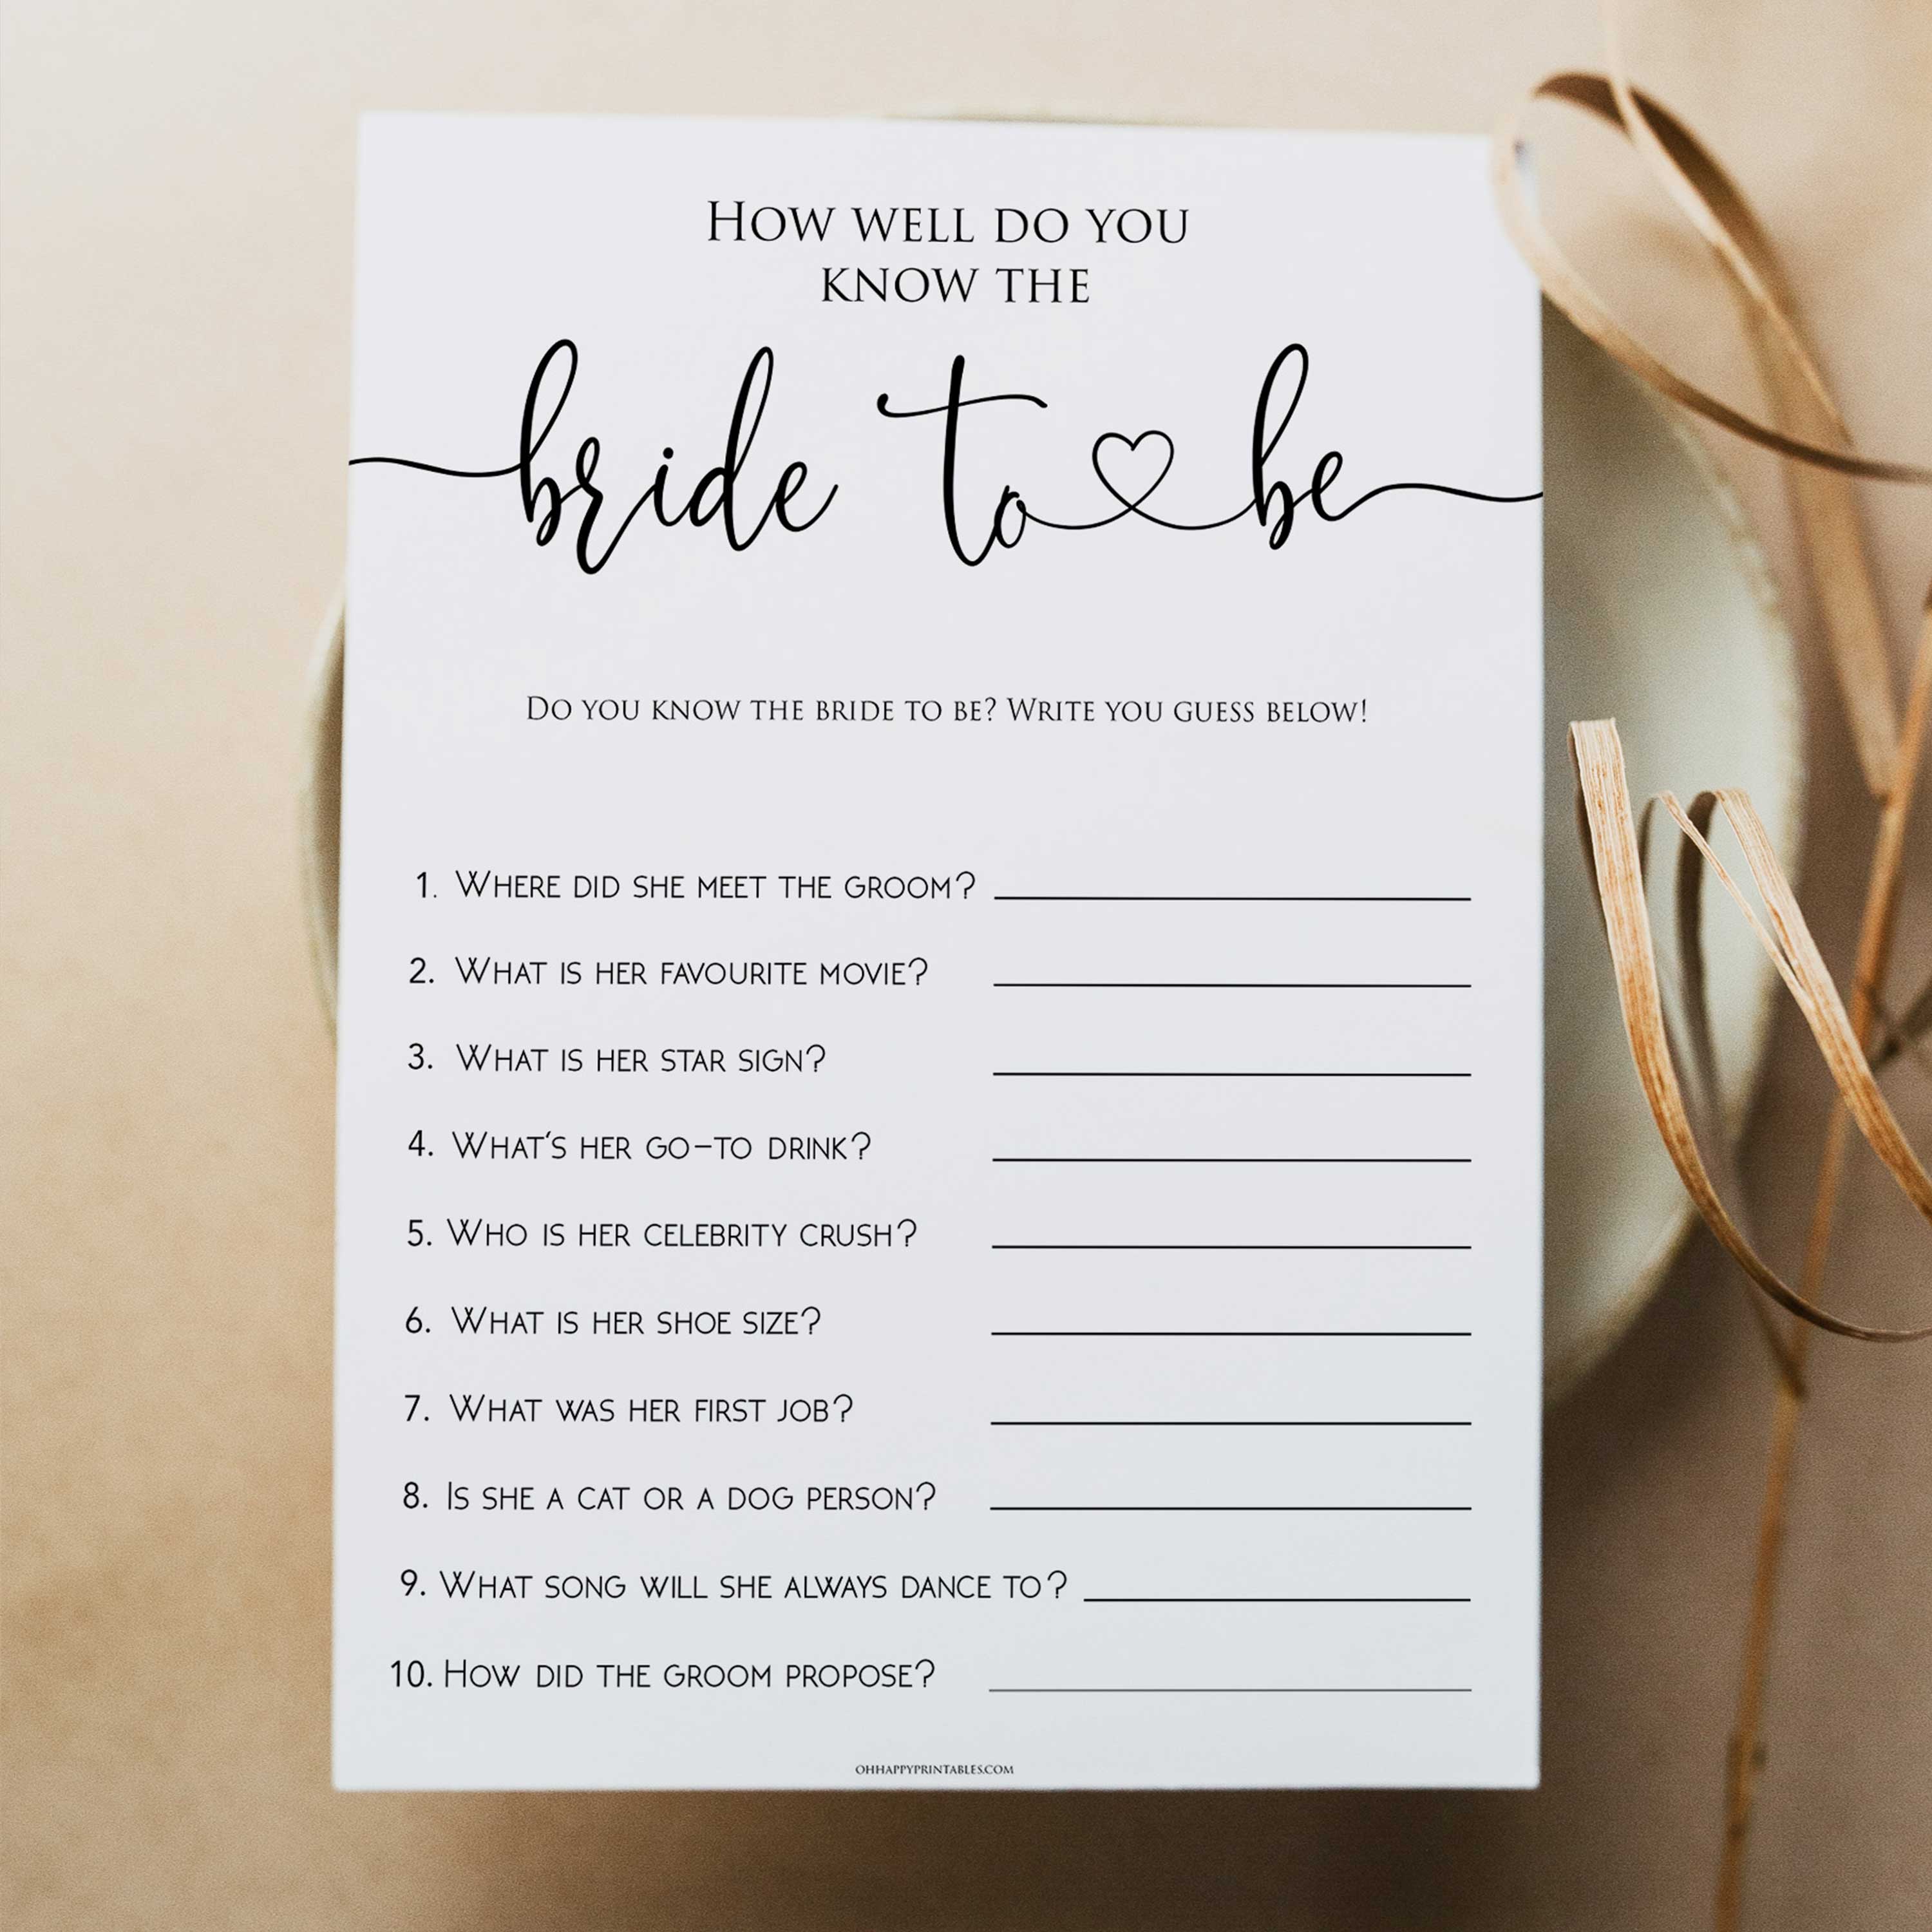 Do You Know The Bride In Minimalist Shop Bridal Shower Games Ohhappyprintables 1585